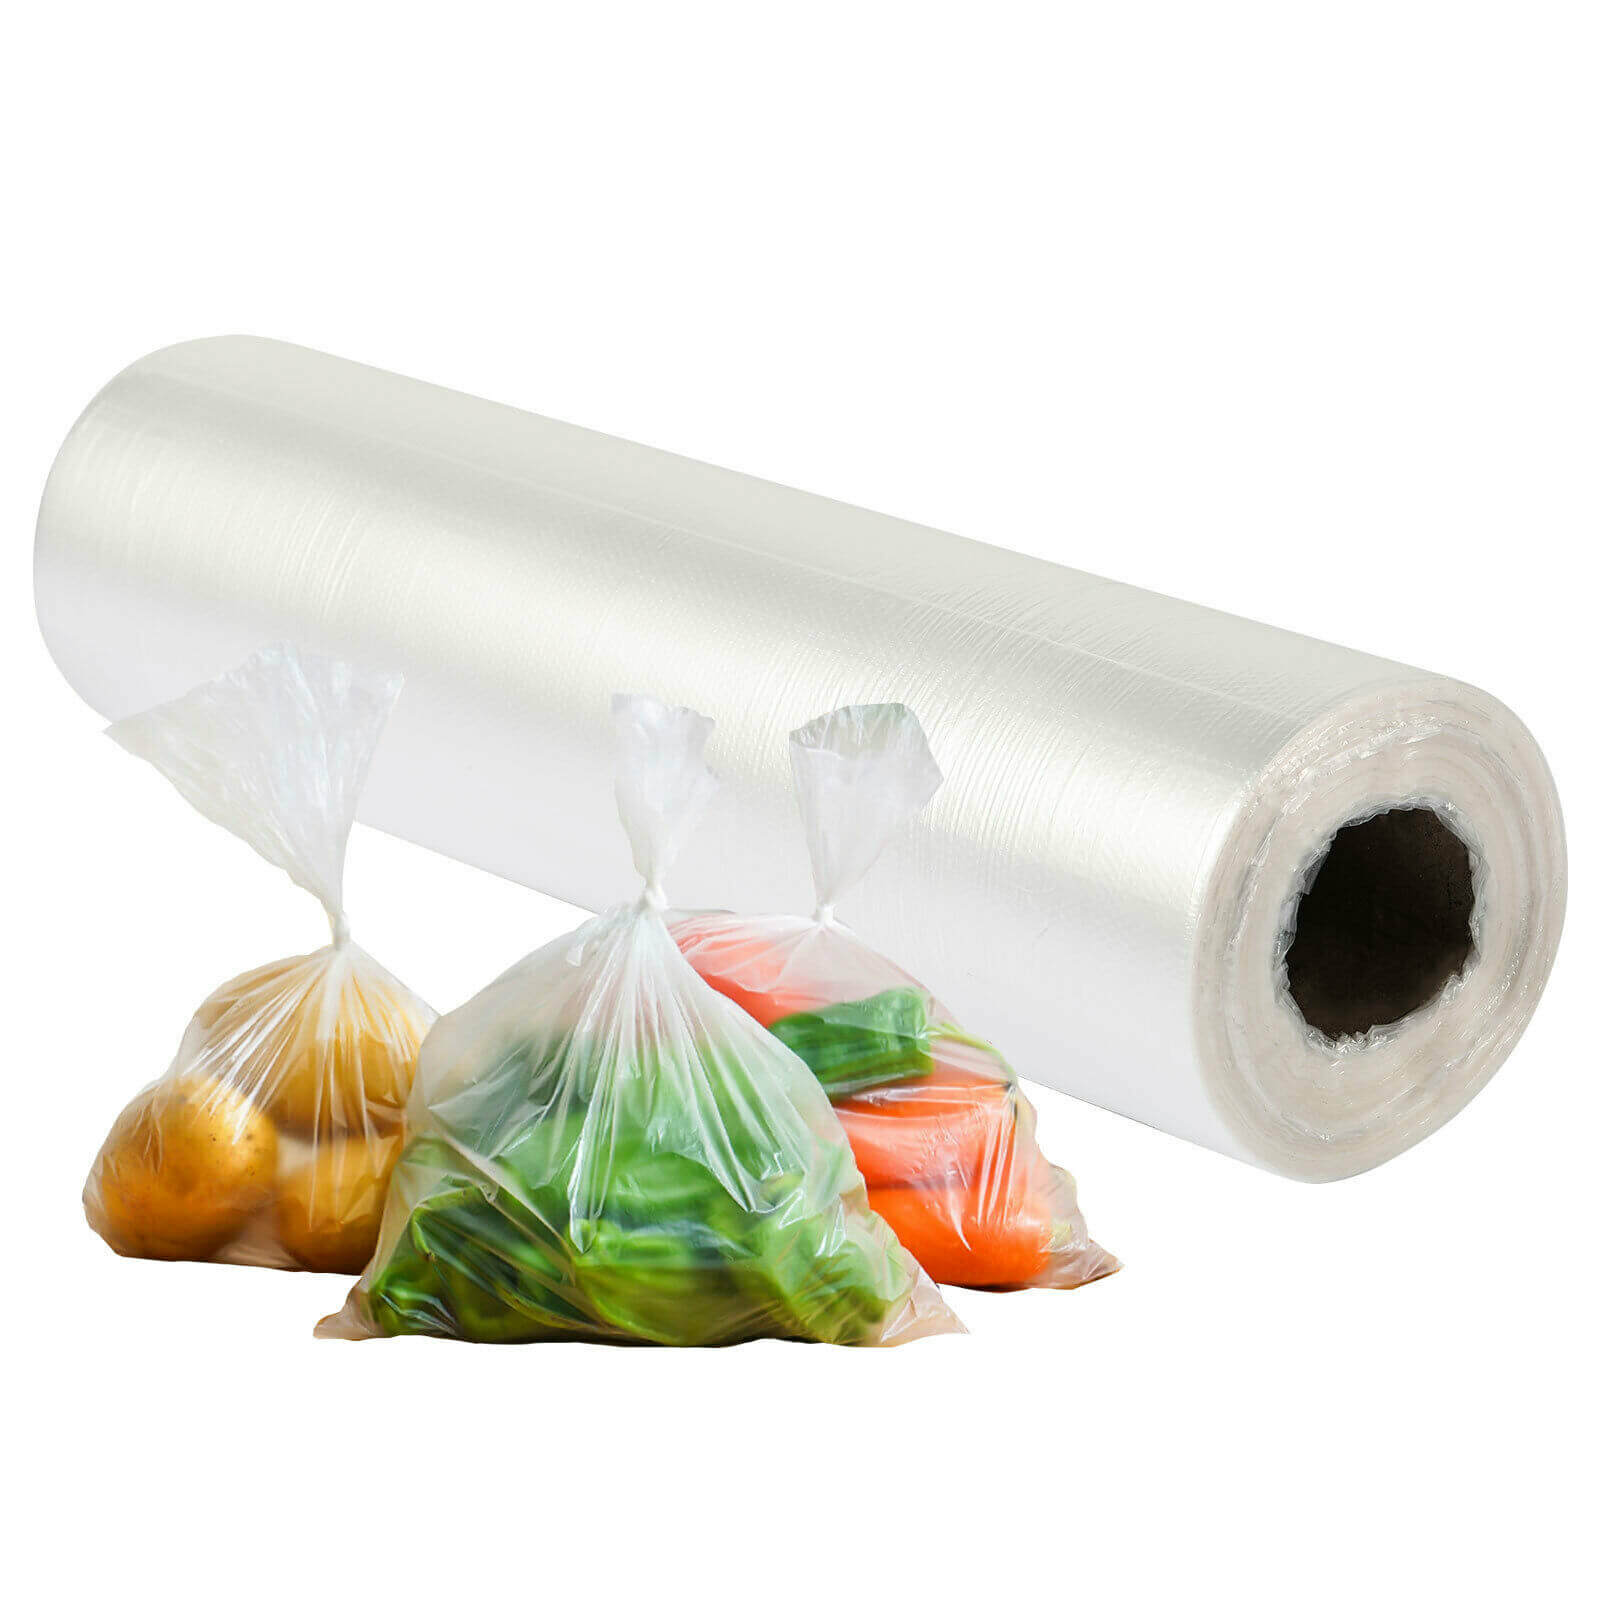 Showing of Plastic Bread Grocery Clear Produce Bag on Roll, 1600pc